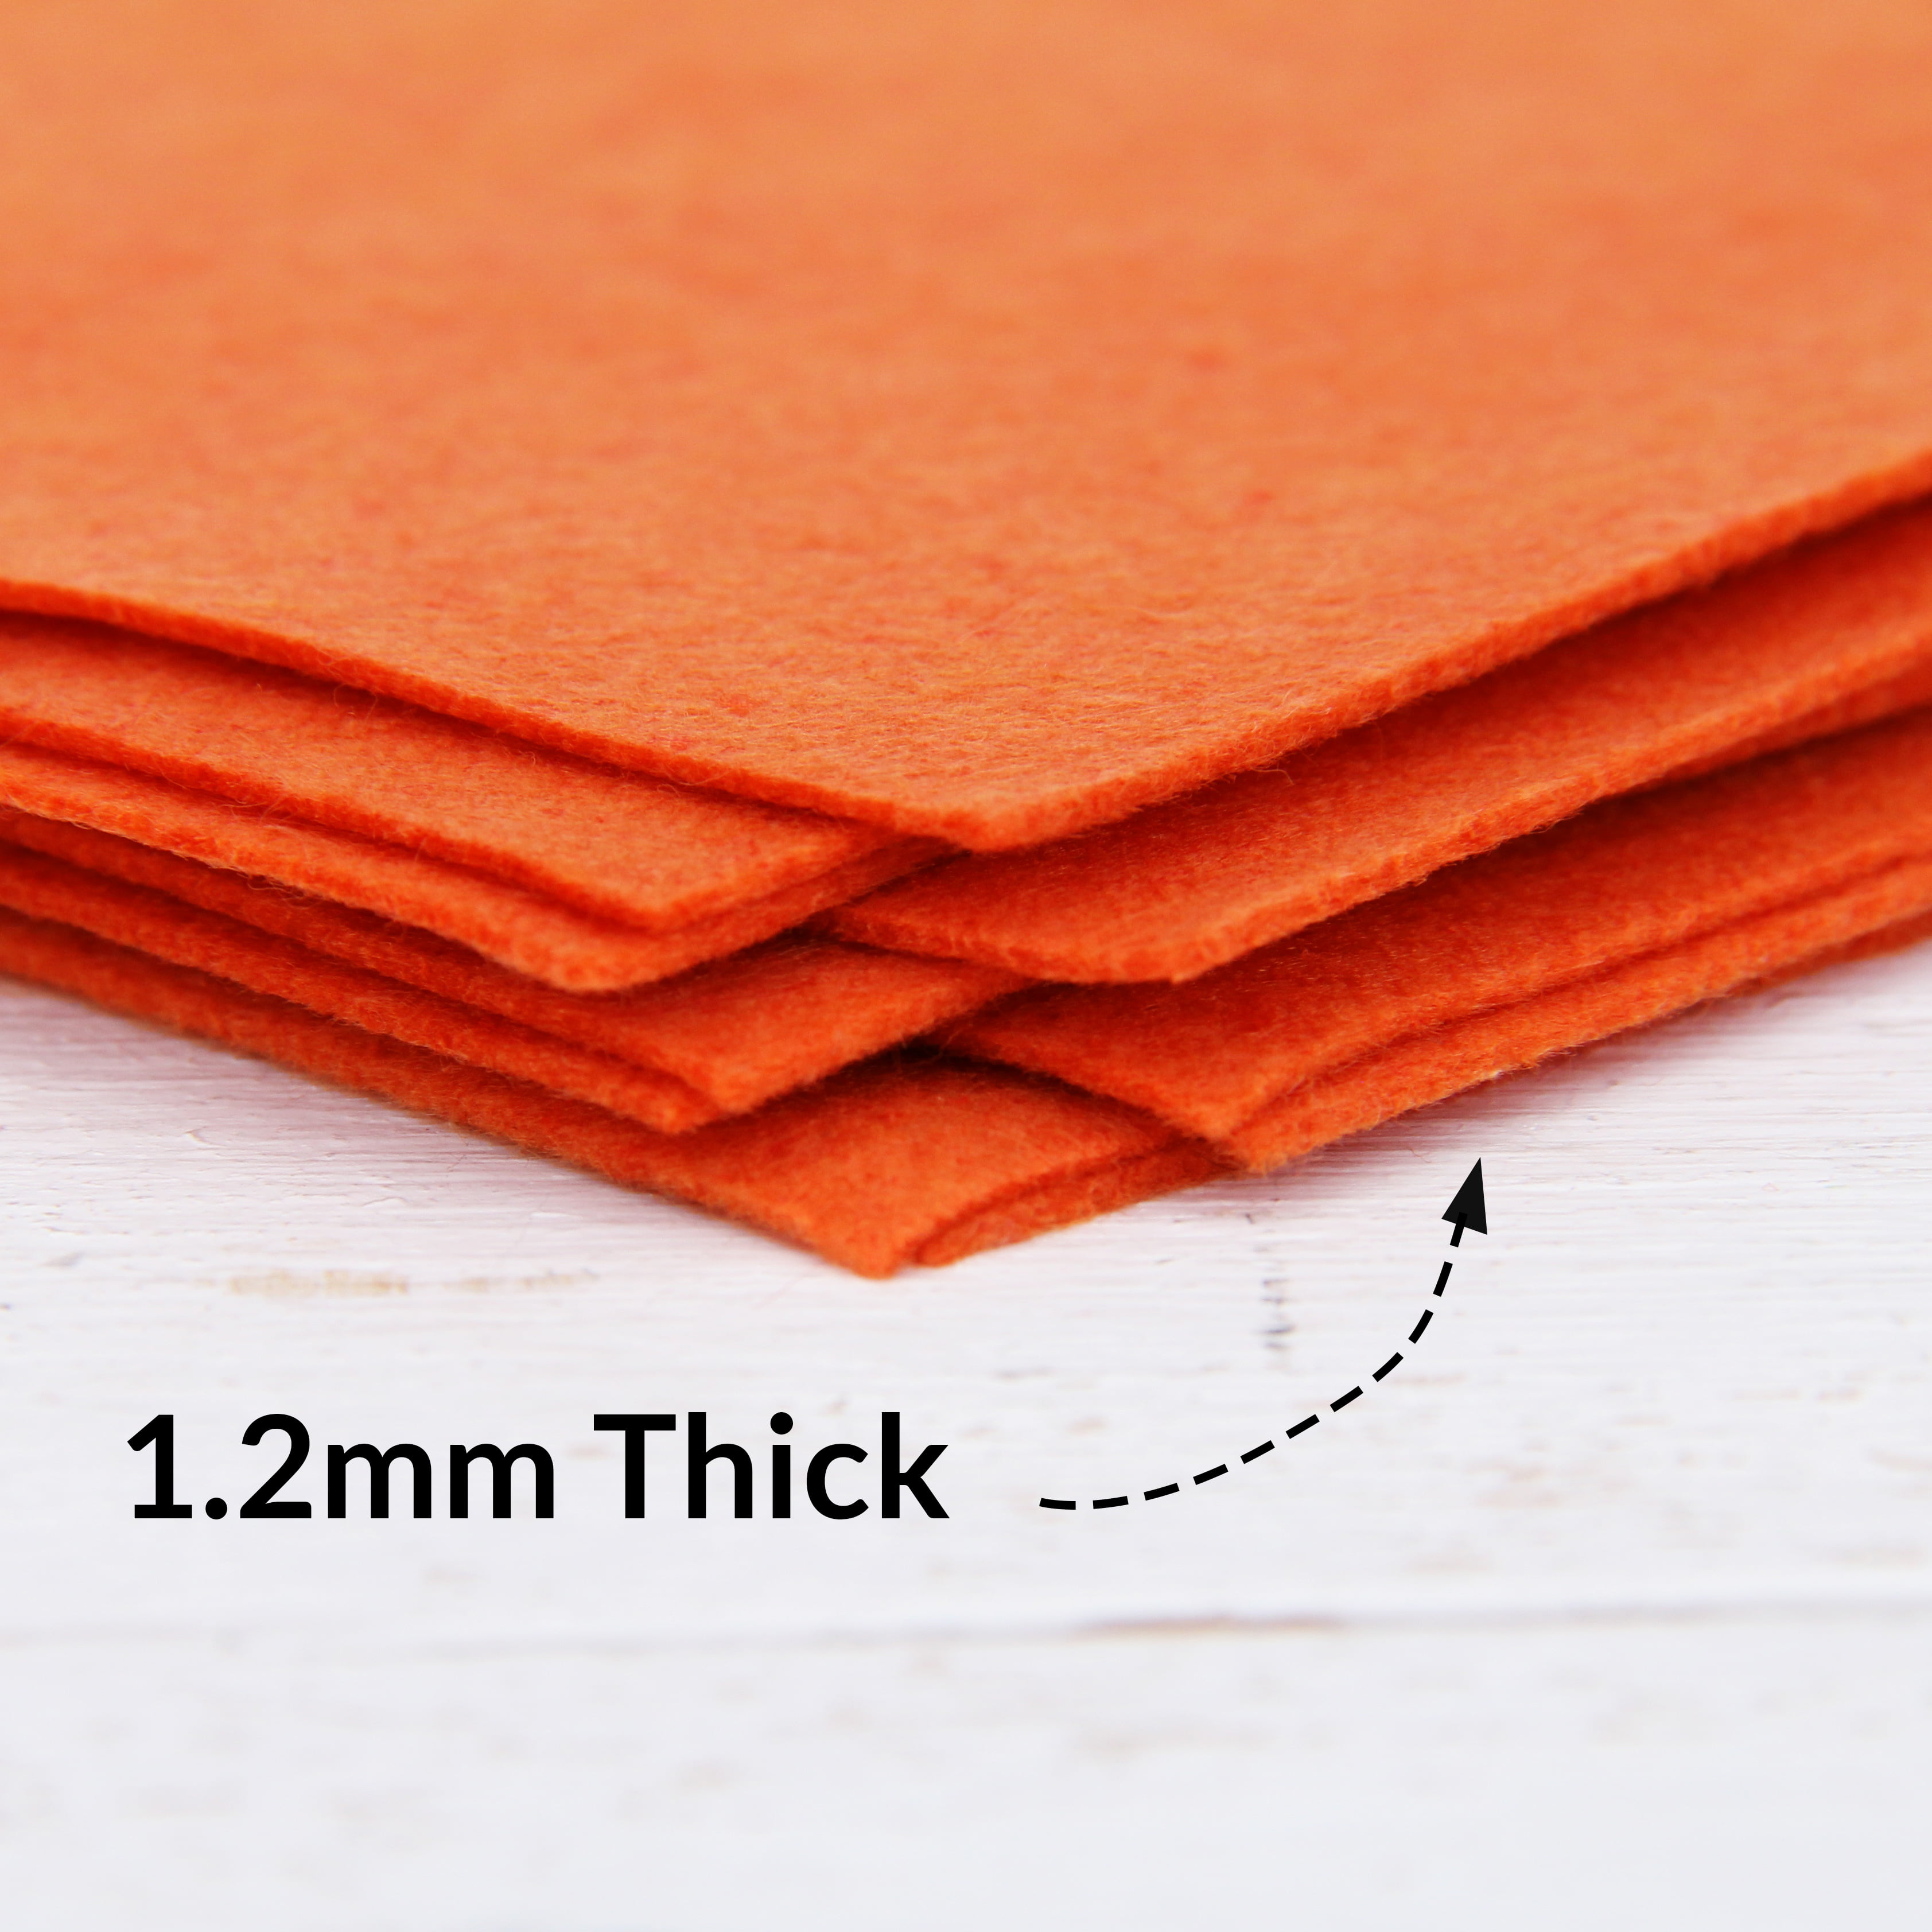 Threadart Premium Felt Roll - 12 x 10yd - Orange | Soft Wool-Like Feel |  1.2mm Thick for DIY Crafts, Sewing, Crafting Projects | Compatible with